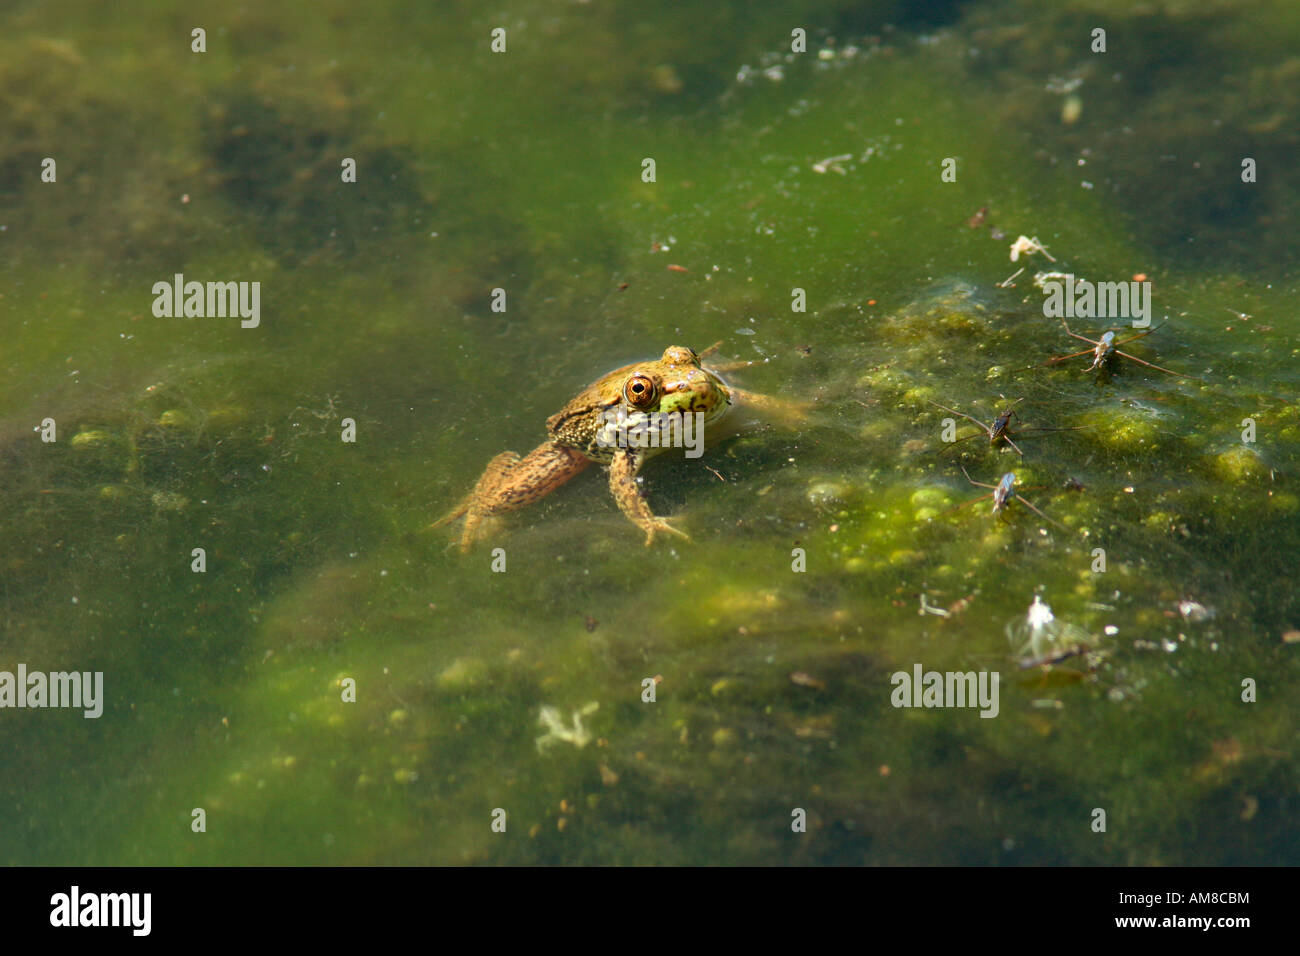 Green Frog in pond Stock Photo